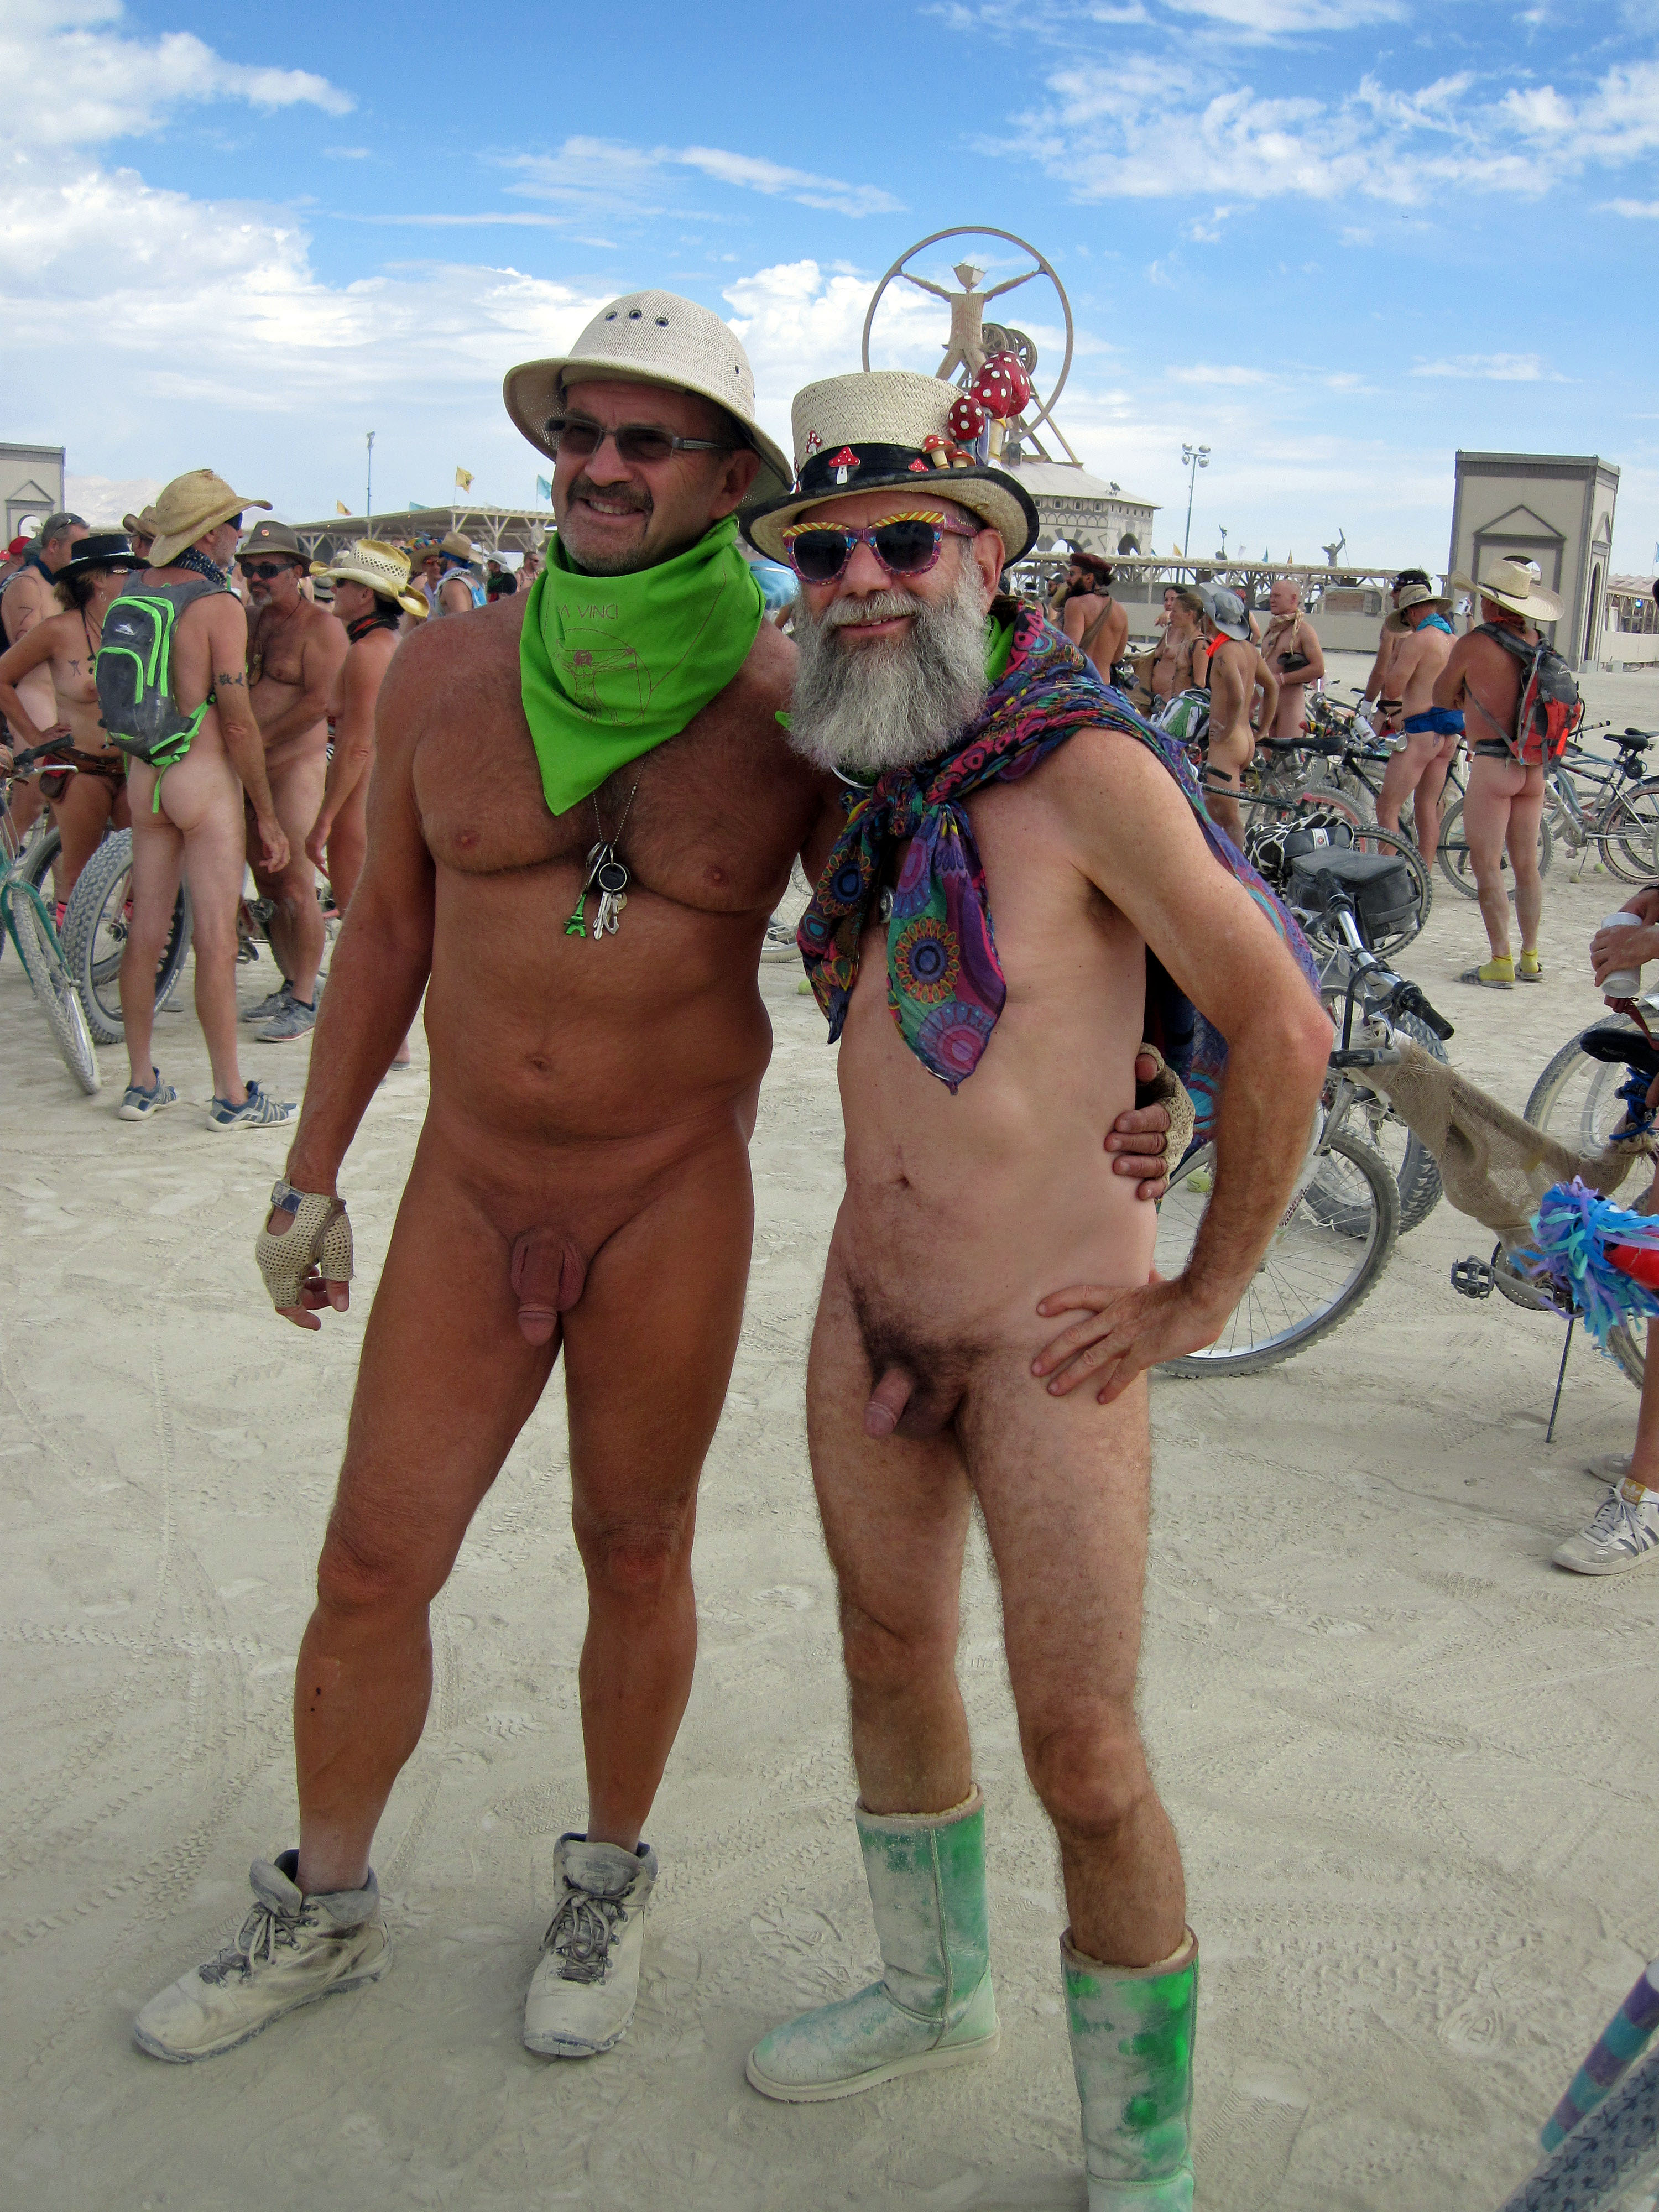 The Nude At Burning Man Festival.